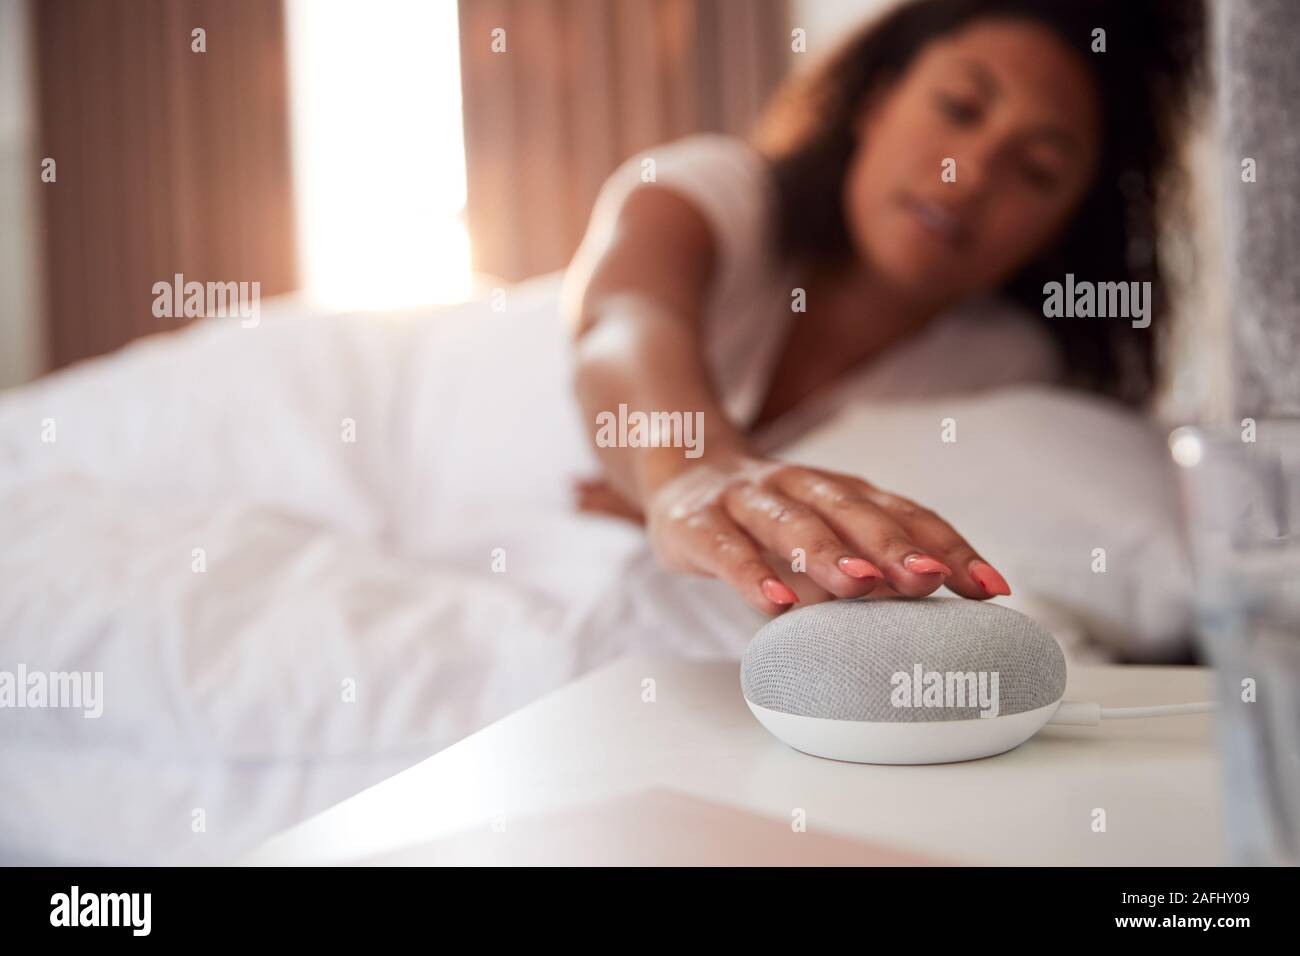 Woman Waking Up In Bed With Voice Assistant On Bedside Table Next To Her Stock Photo